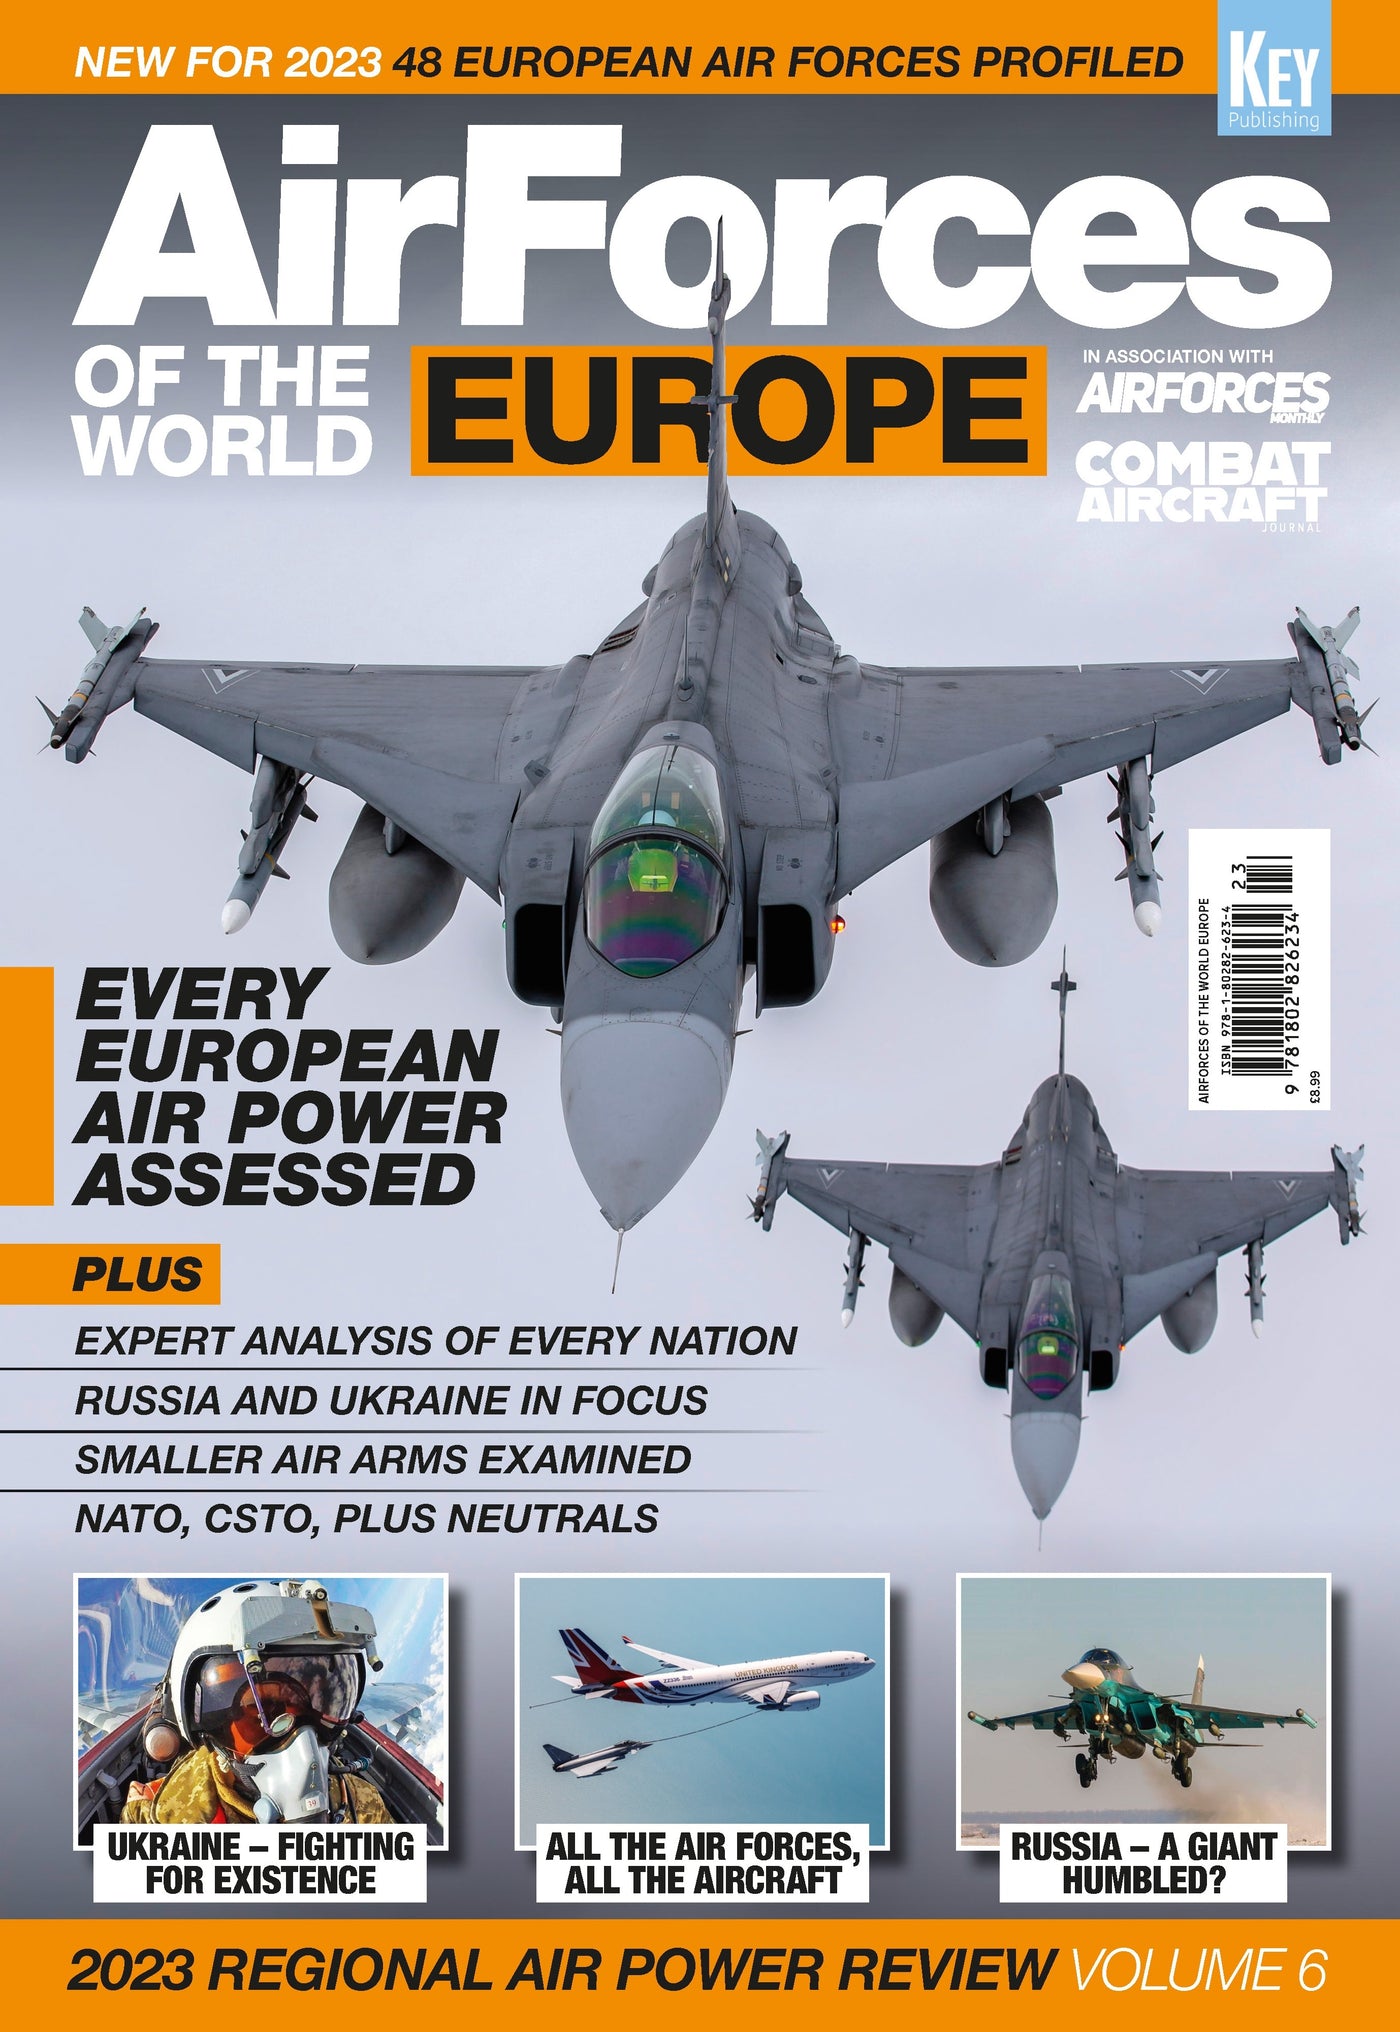 Air Forces of the World - Europe